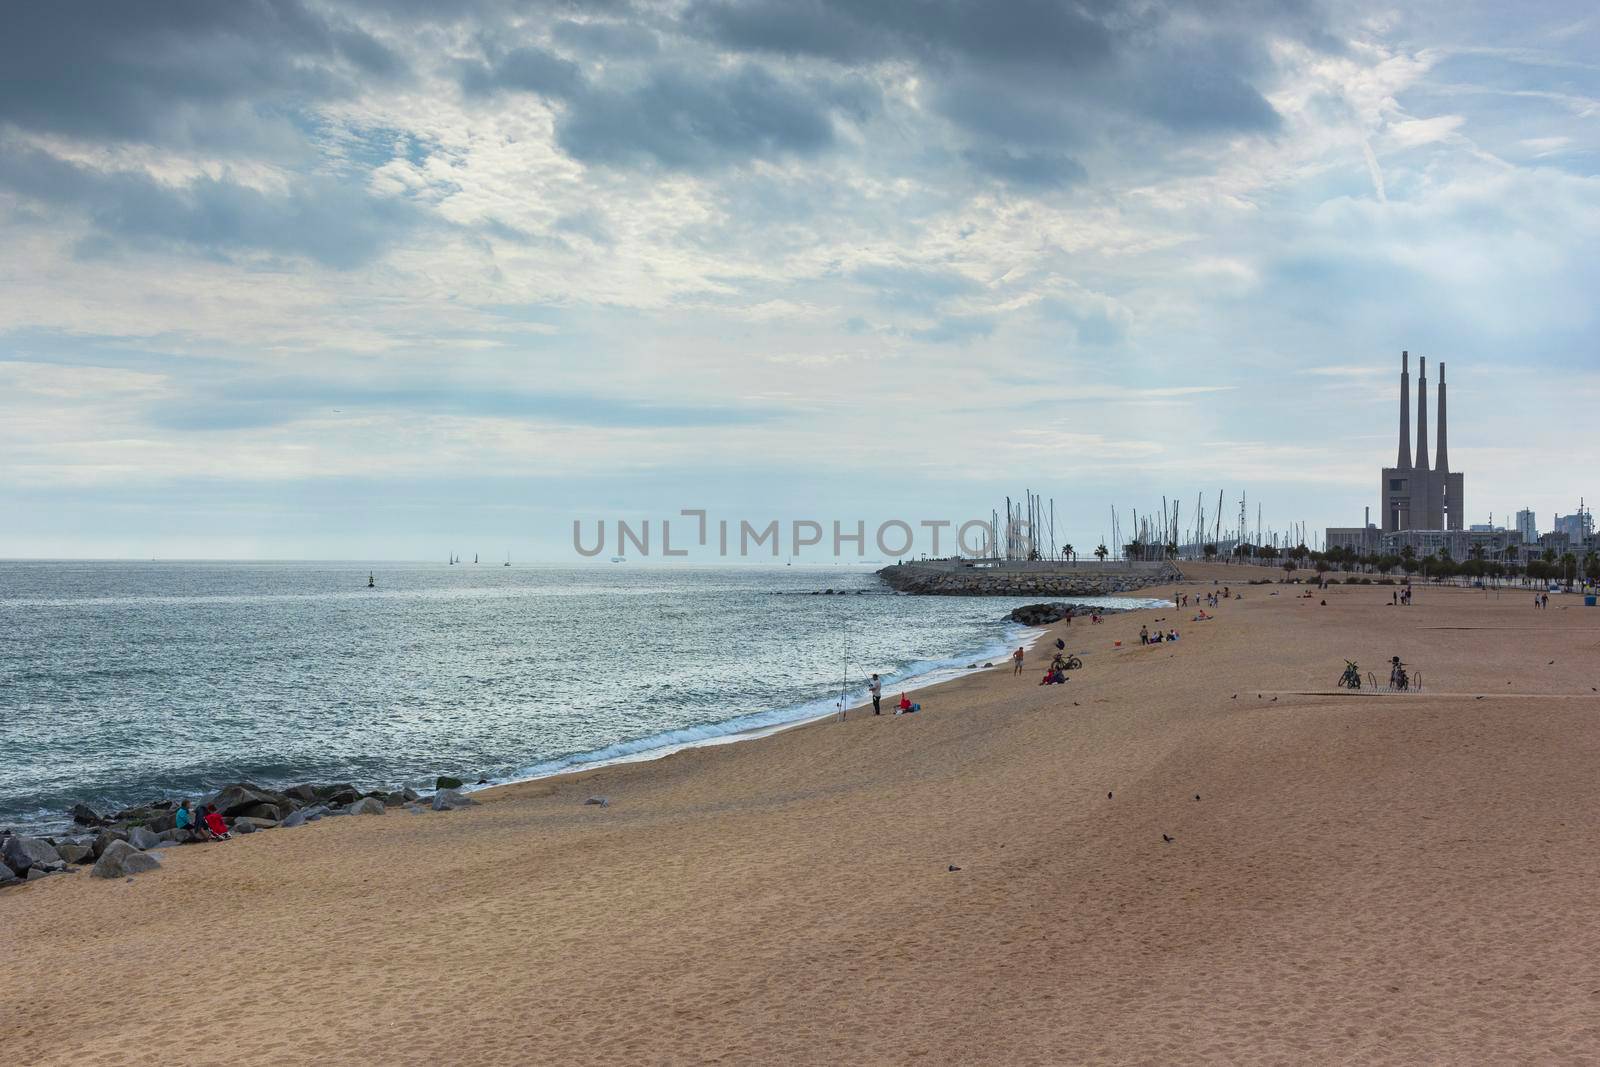 Barcelona beach in winter, with a calm sea. by loopneo